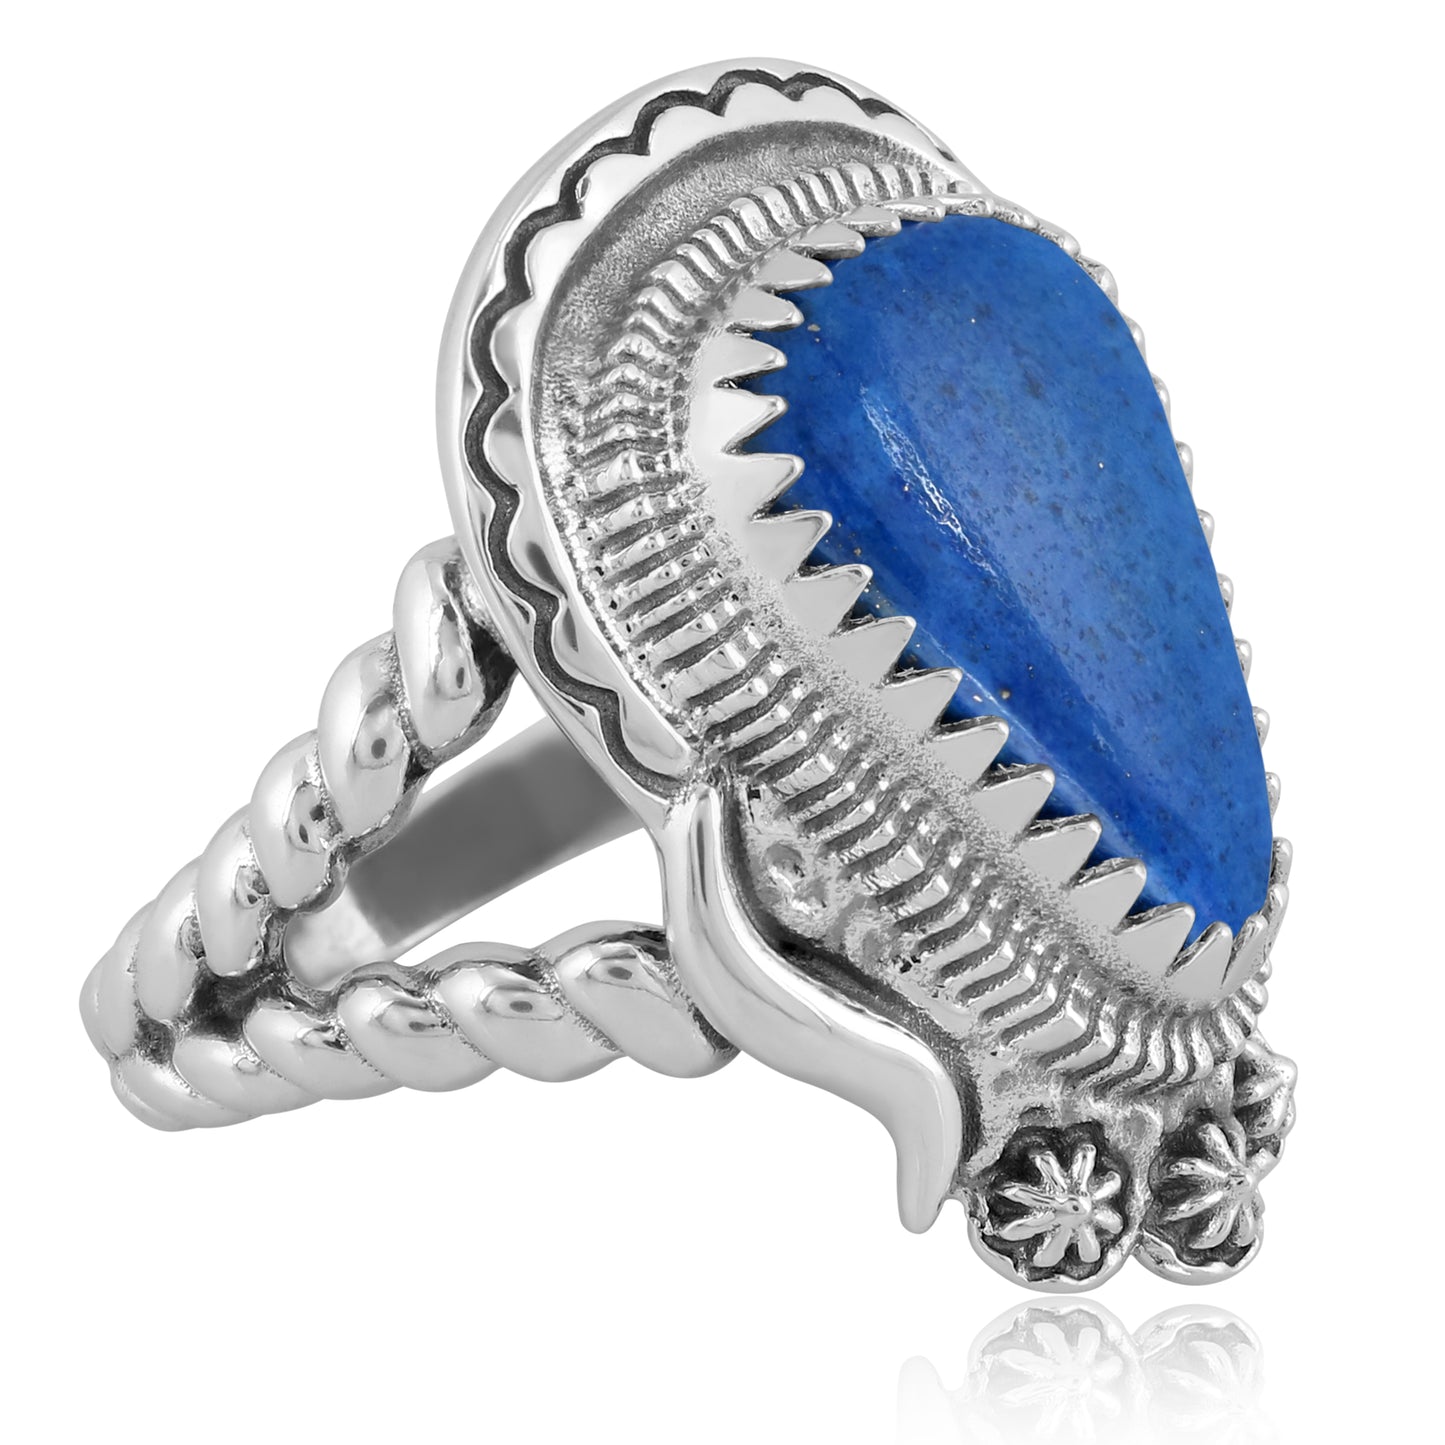 Southwestern Blue Buffalo Rope Ring with Sterling Silver Band and Denim Lapis Gemstone, Sizes 6 - 11